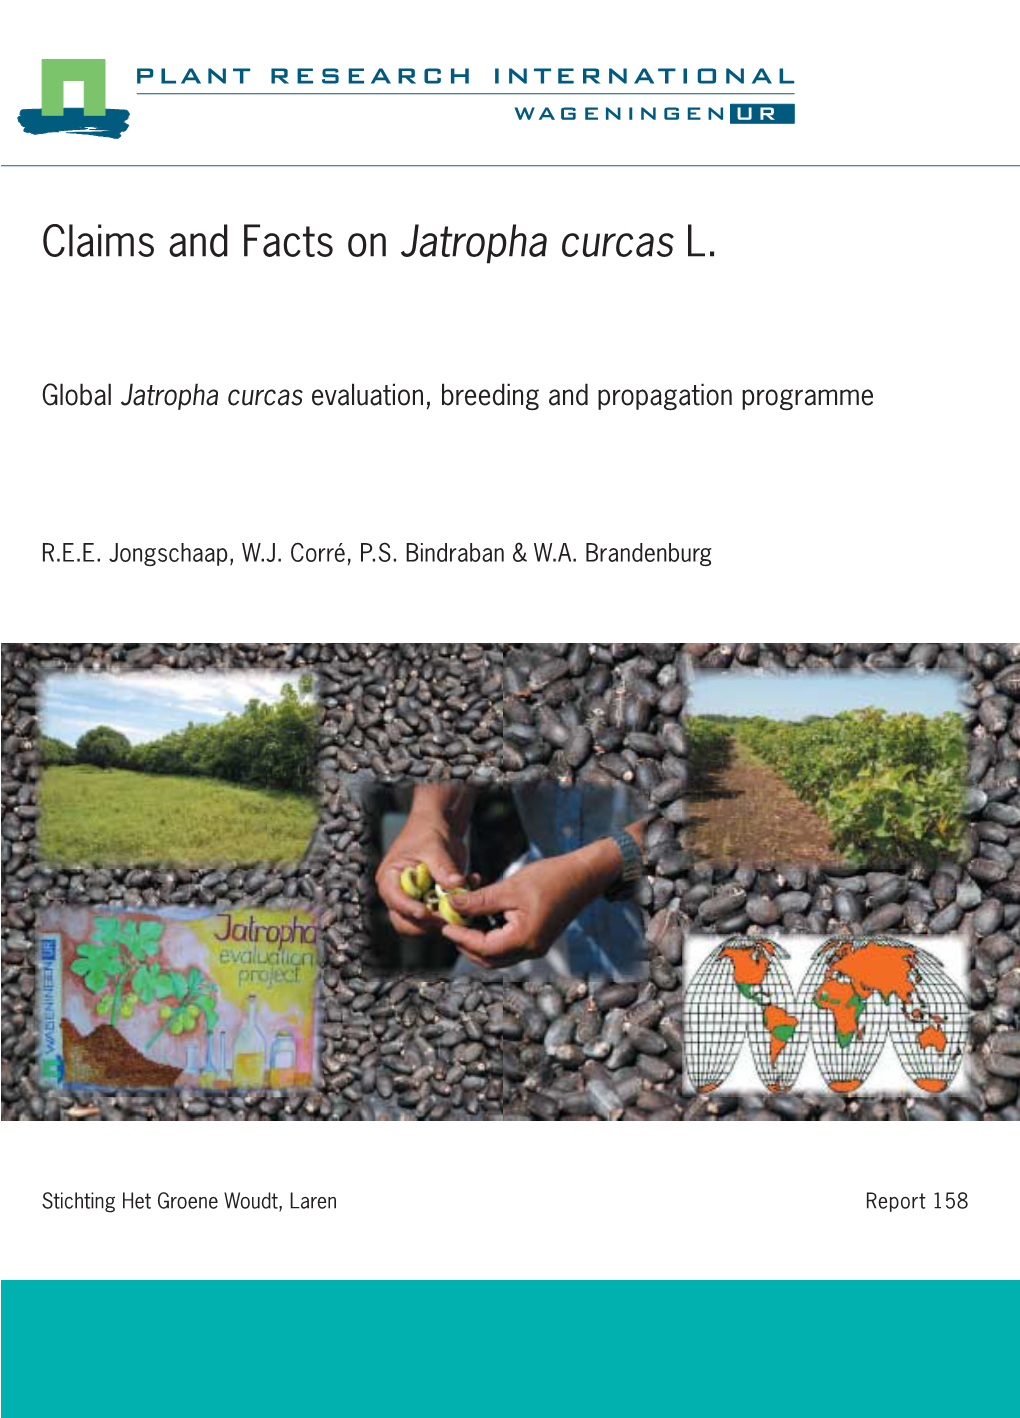 Claims and Facts on Jatropha Curcas L